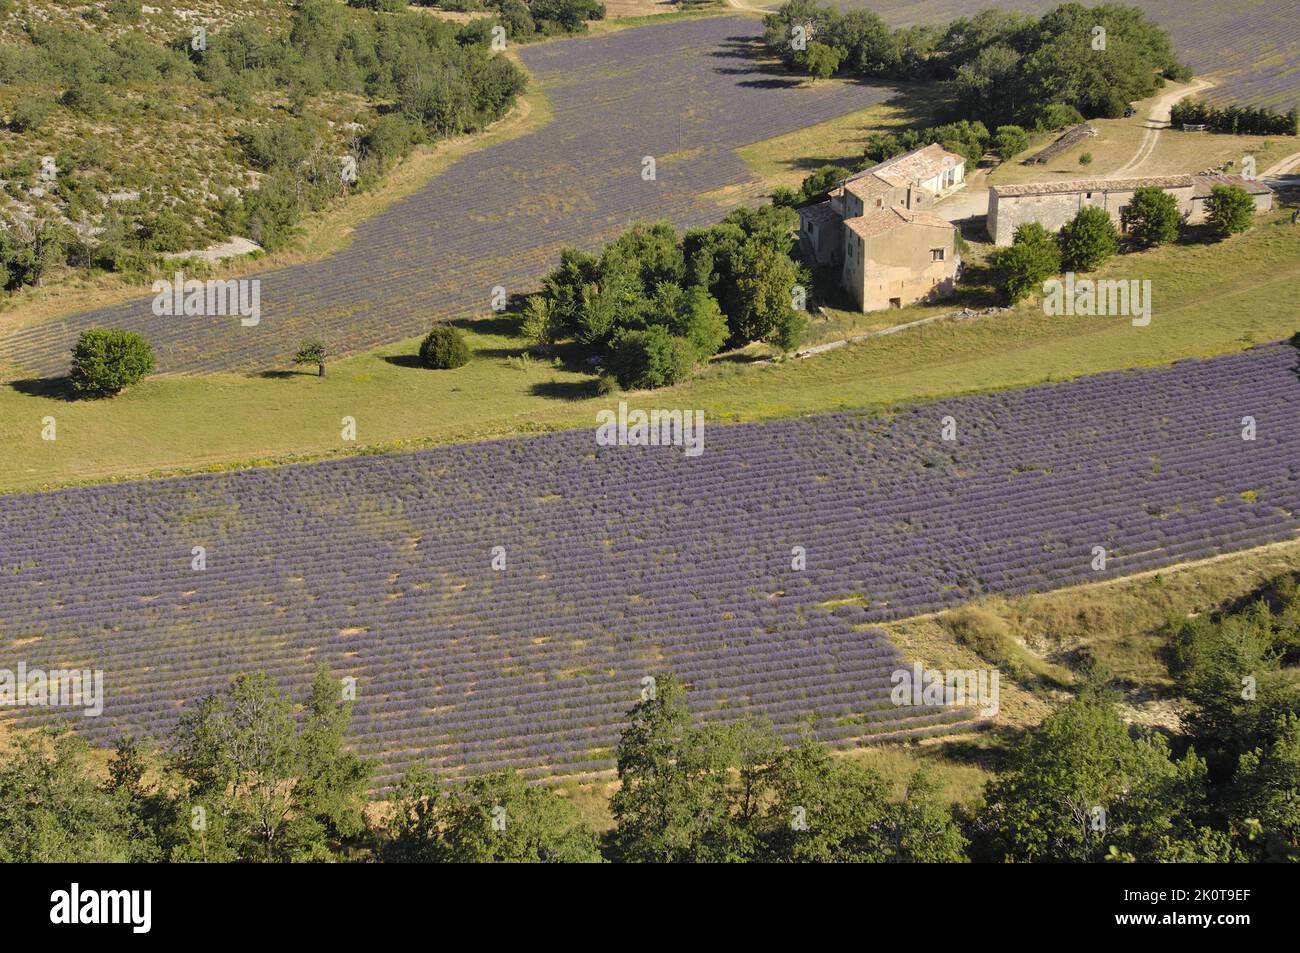 Lavender (Lavandula sp) farm close to a field of flowers to be harvested Sault area - Provence - Vaucluse - France Stock Photo